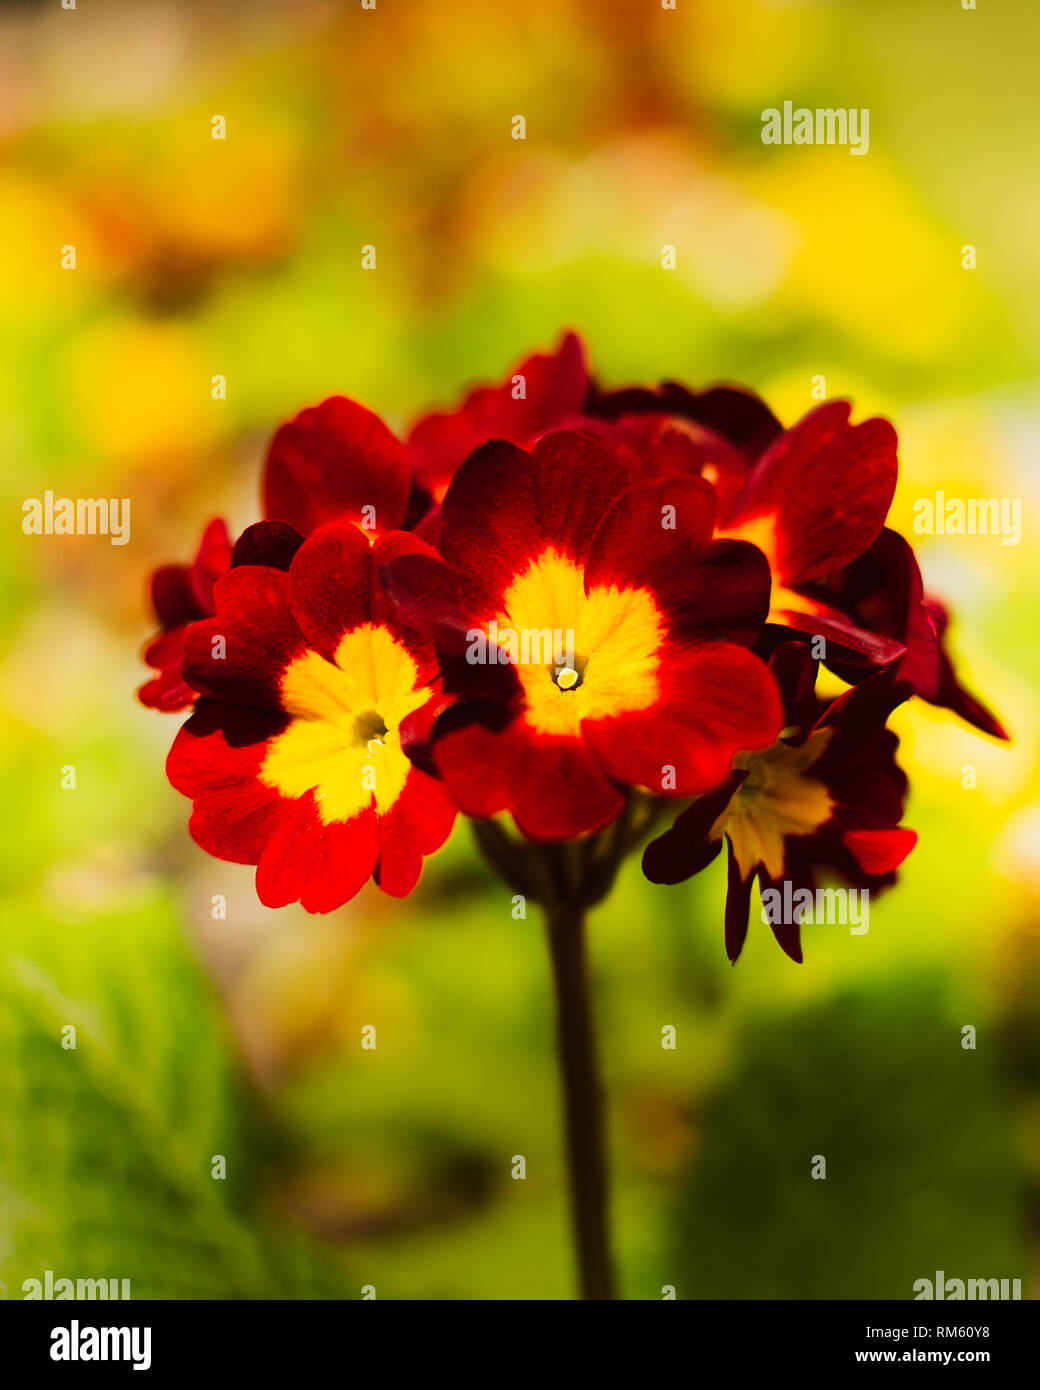 A red and yellow primrose in a bold close up Stock Photo